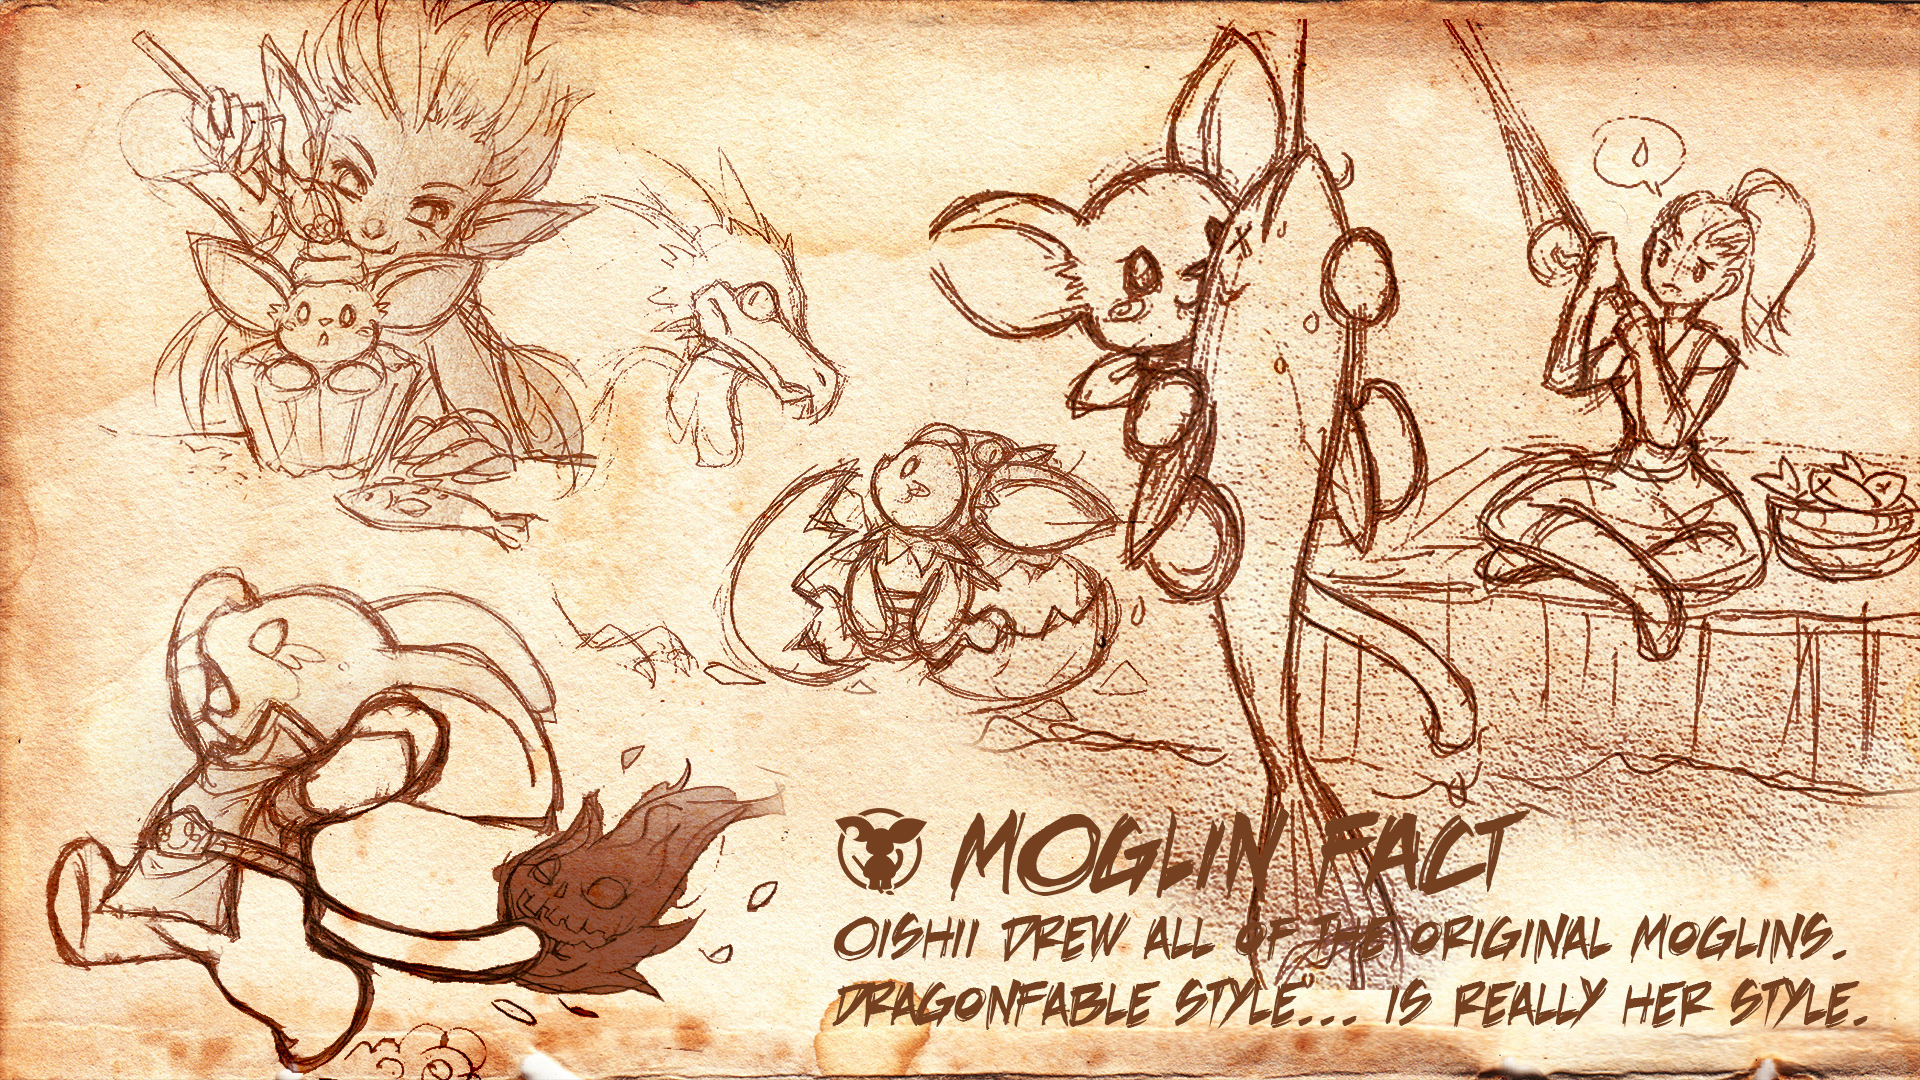 The Moglin style was created by Oishii... she drew all of the original Moglins